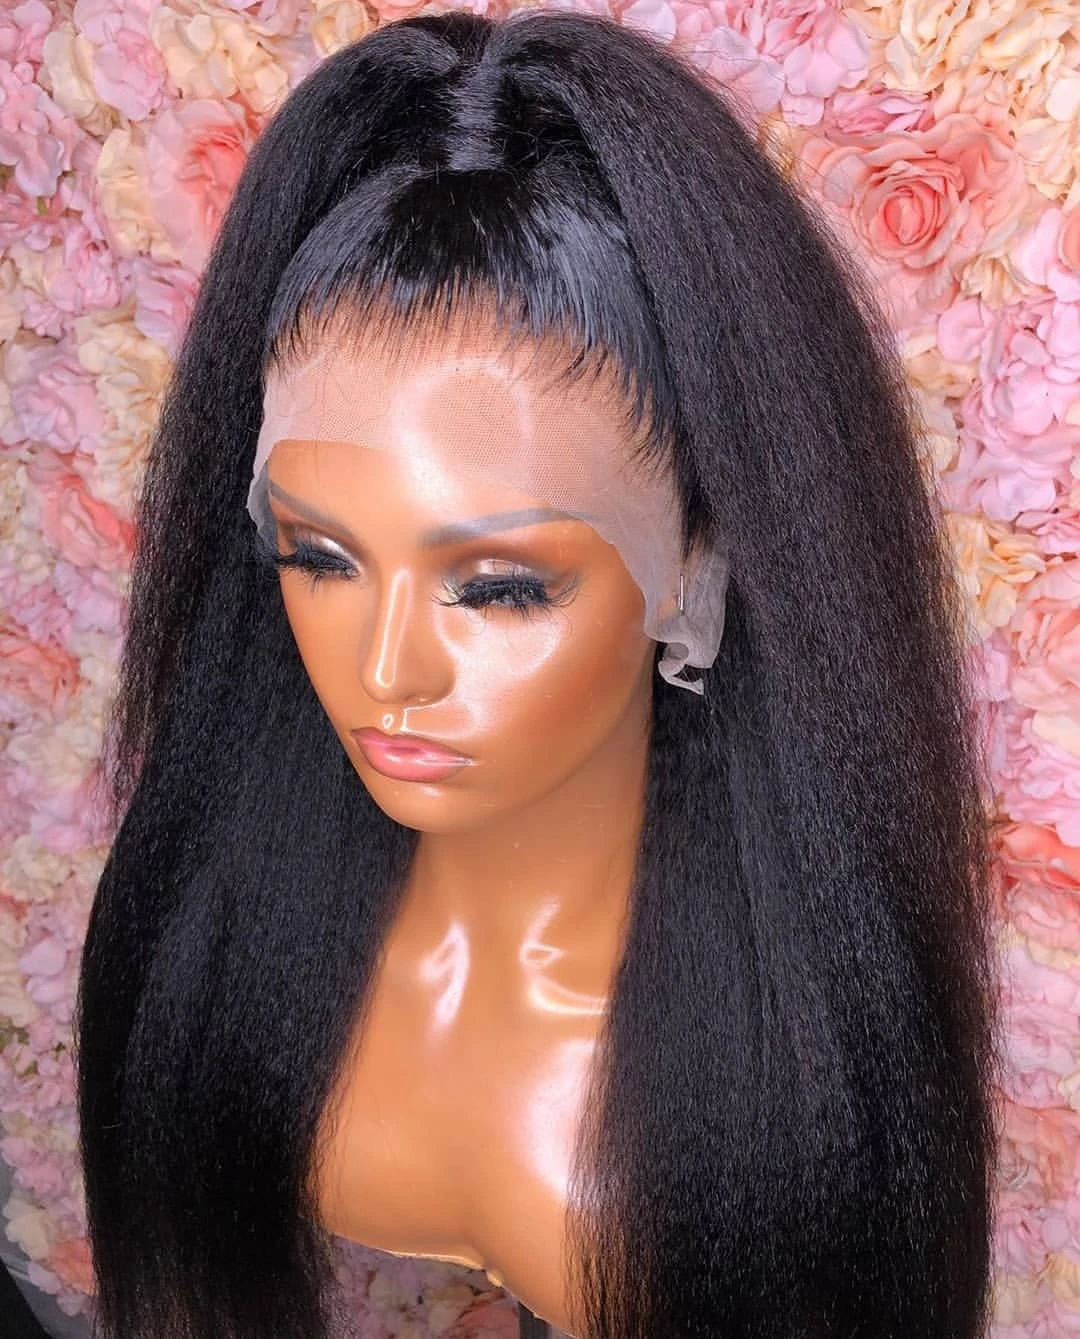 Wholesale Cheap Price Natural black Yaki Straight Human Hair Lace Front Wig New Fashion Hair Style Wigs On Sale